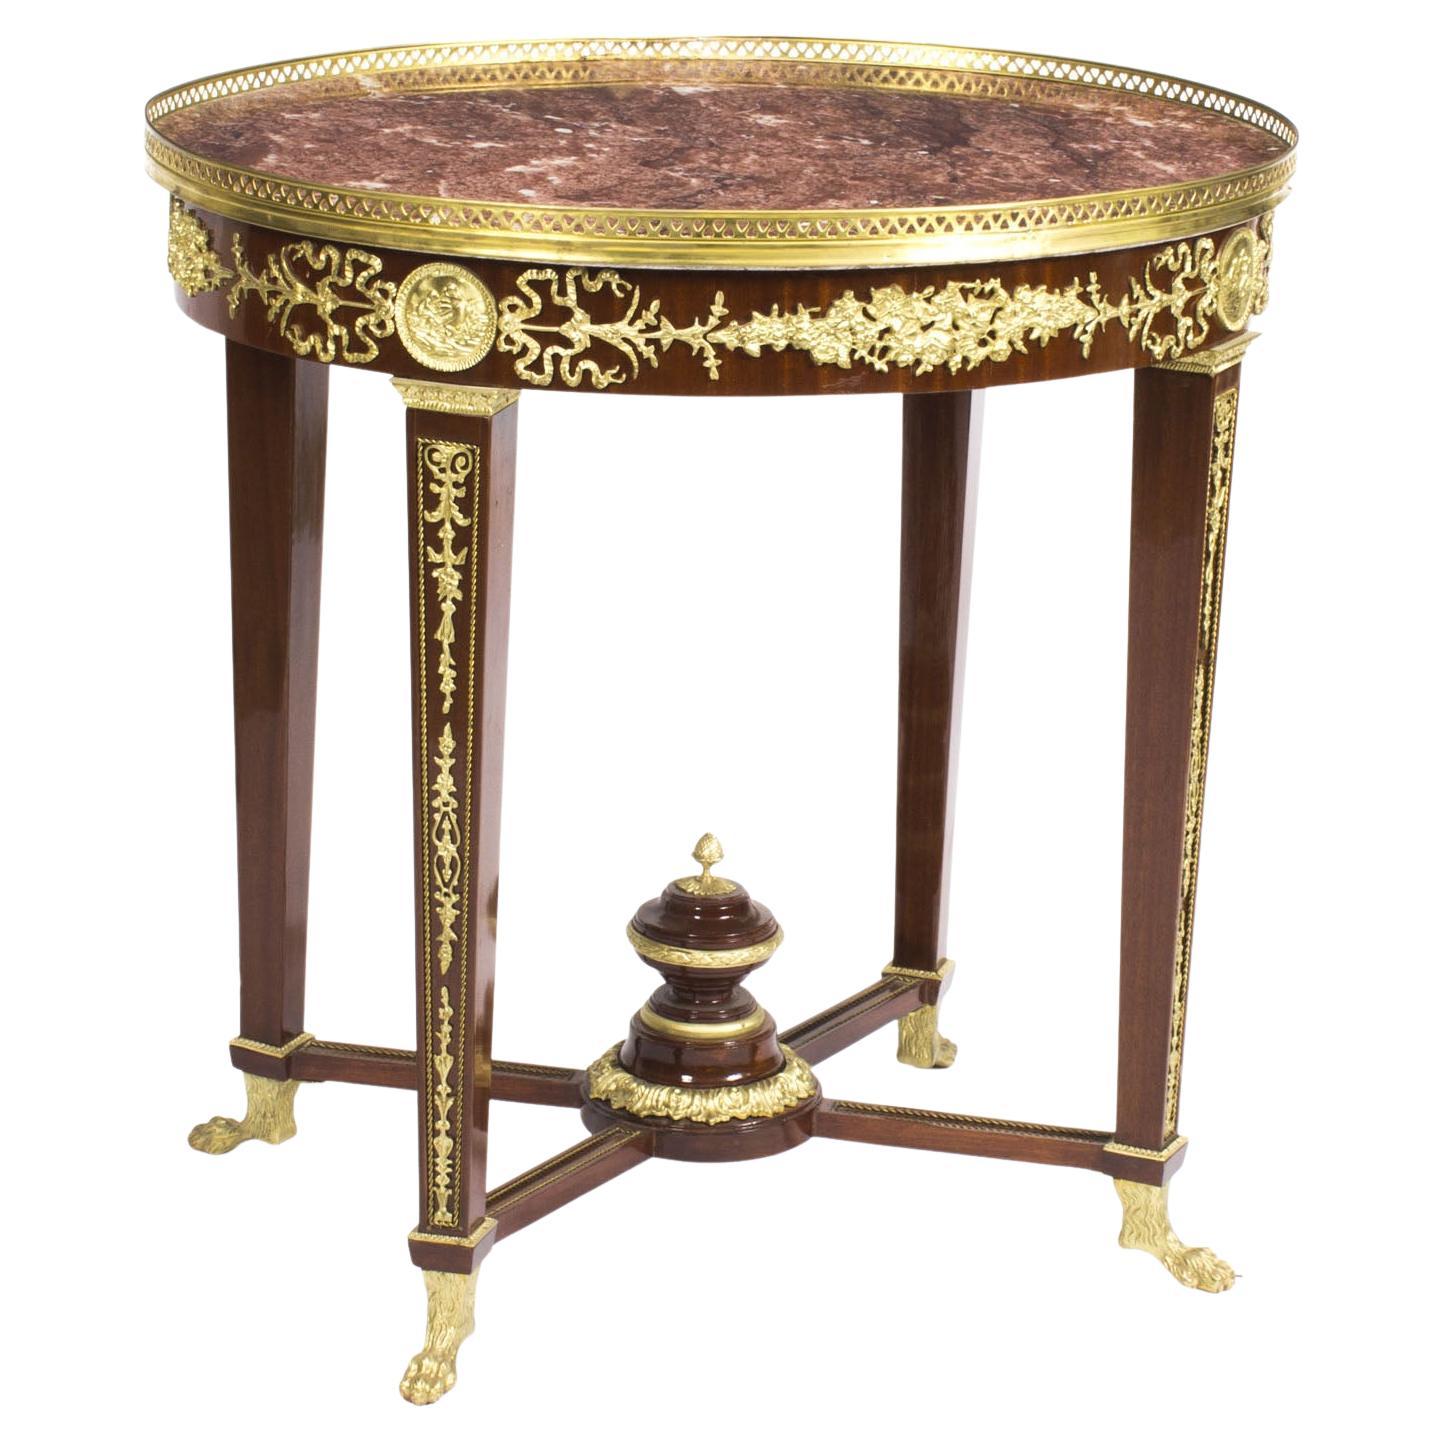 Vintage Empire Revival Marble Top Ormolu Mounted Occasional Table 20th C For Sale